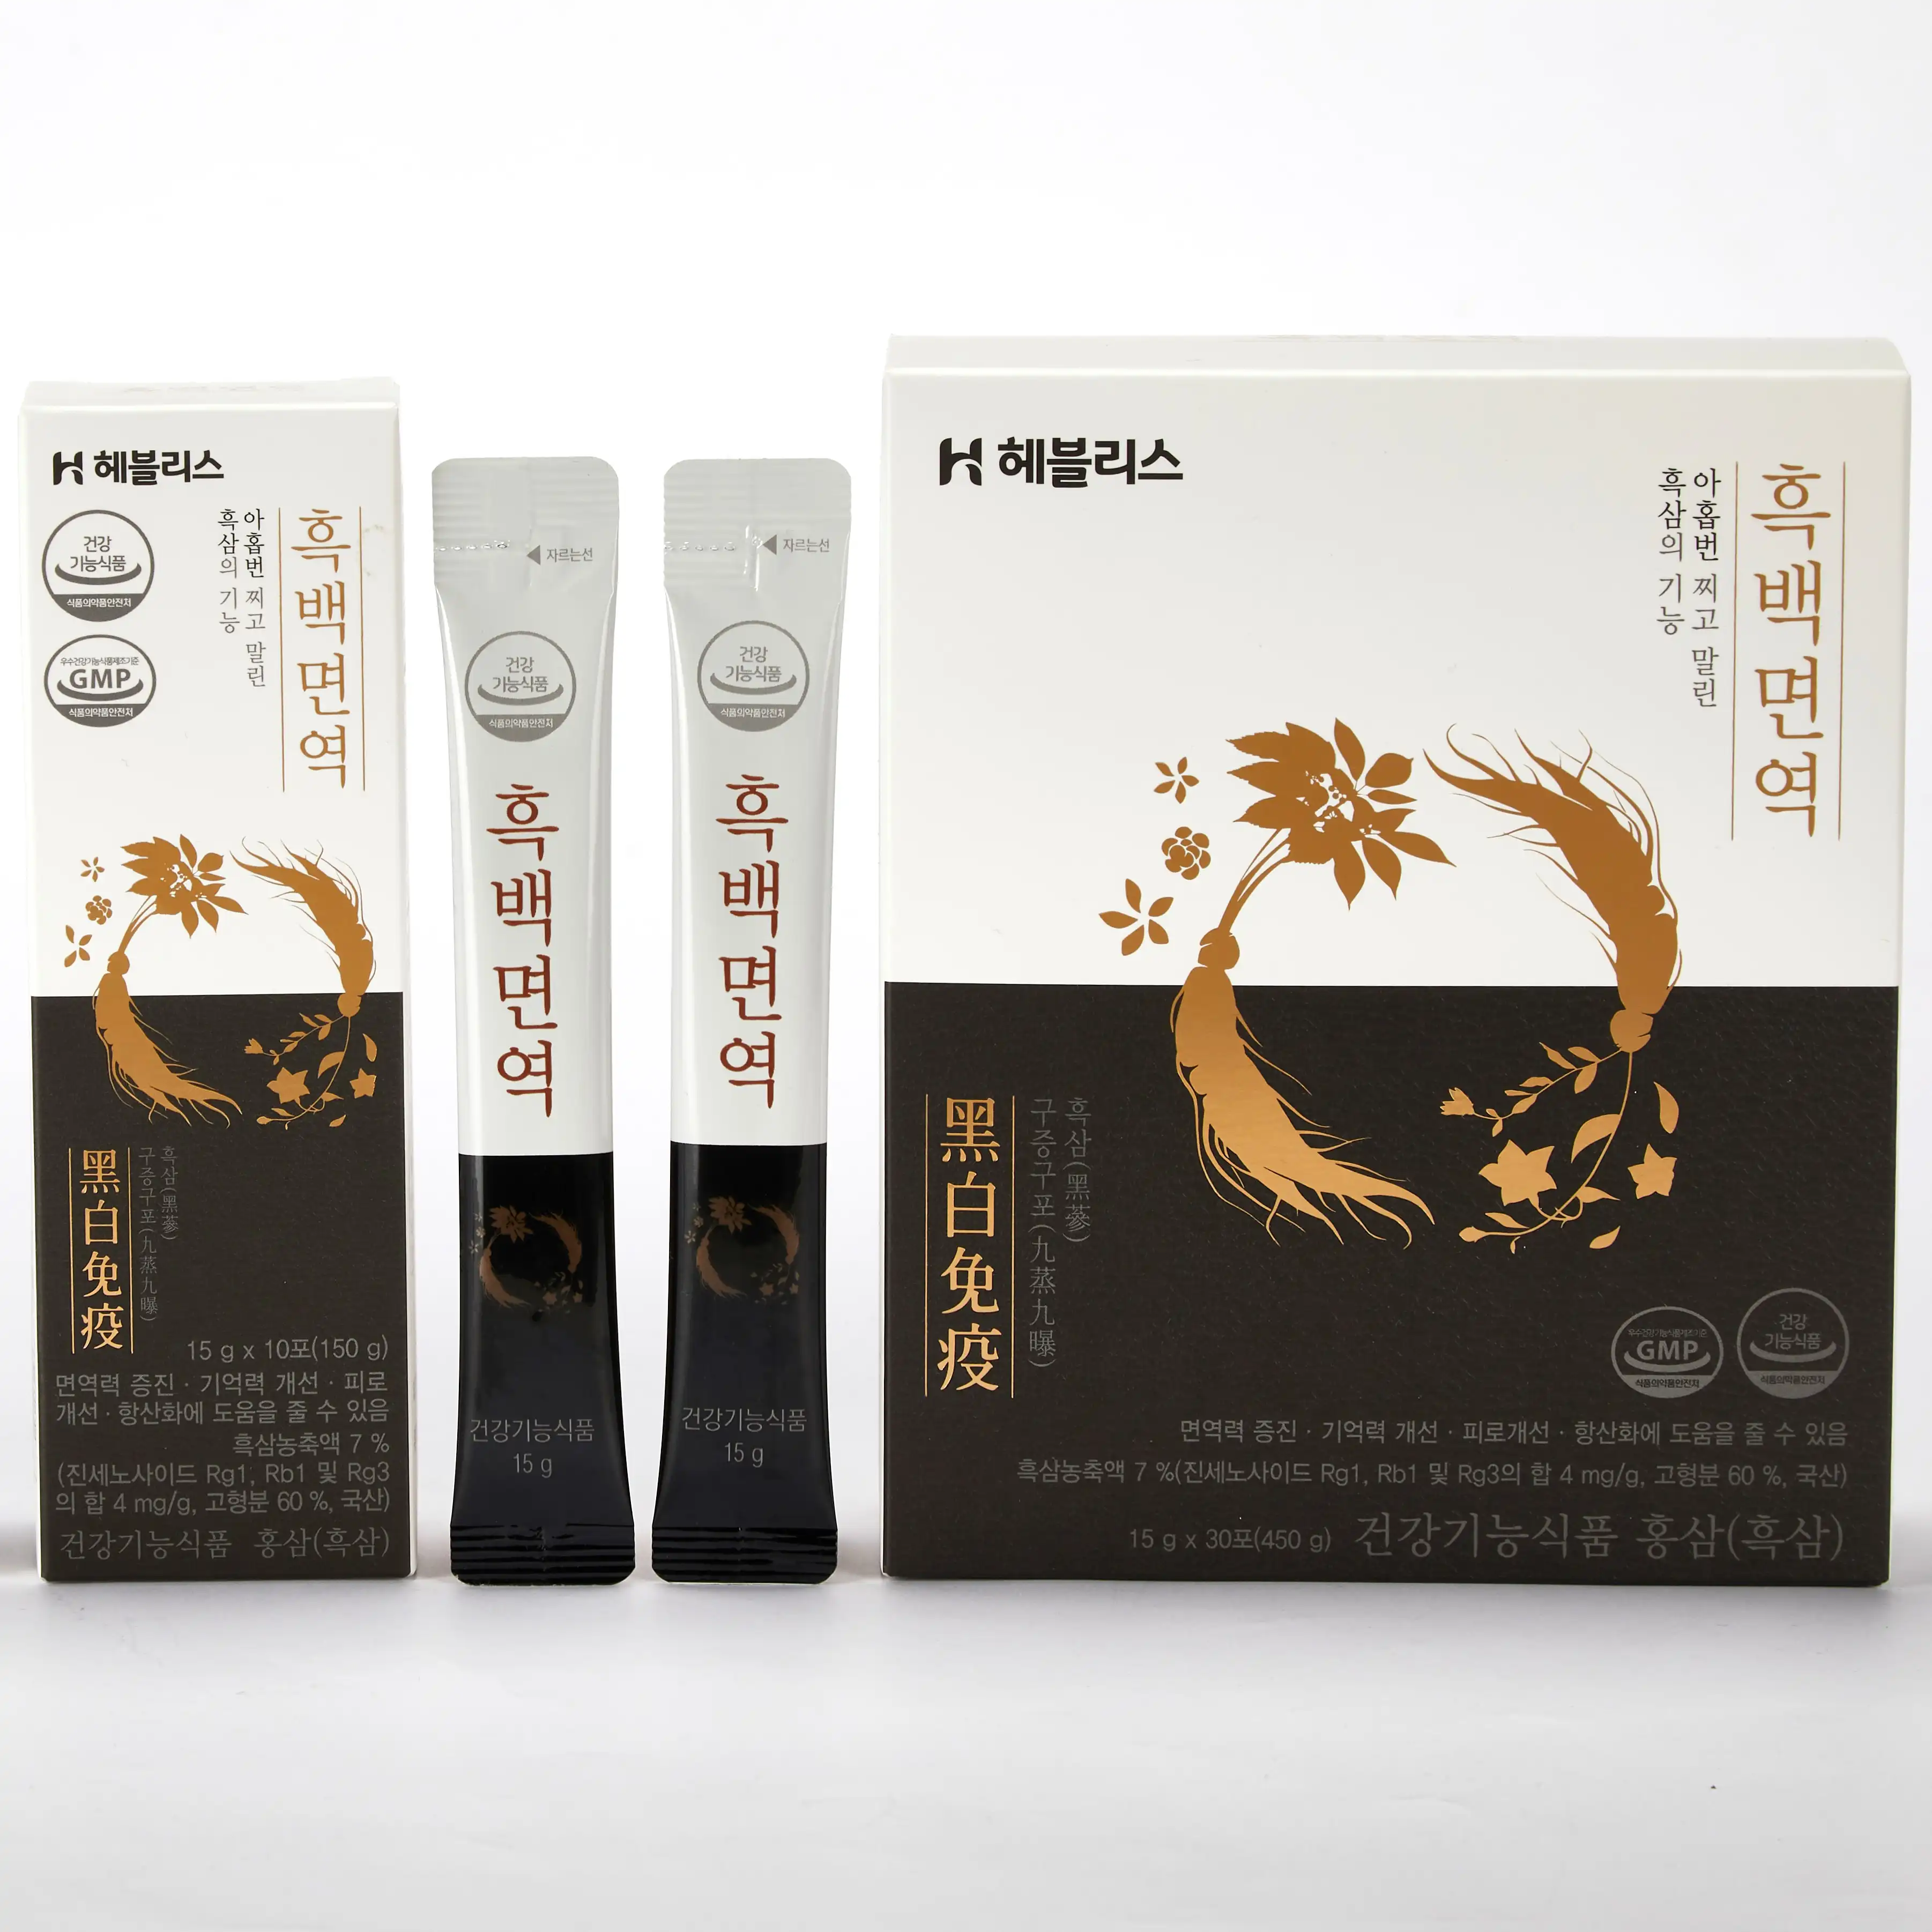 (TOP) Ginseng extract Supplement from Korea Black Ginseng Steamed and Dried for 9 times Repeatedly 10 times higher Rg3 Saponin